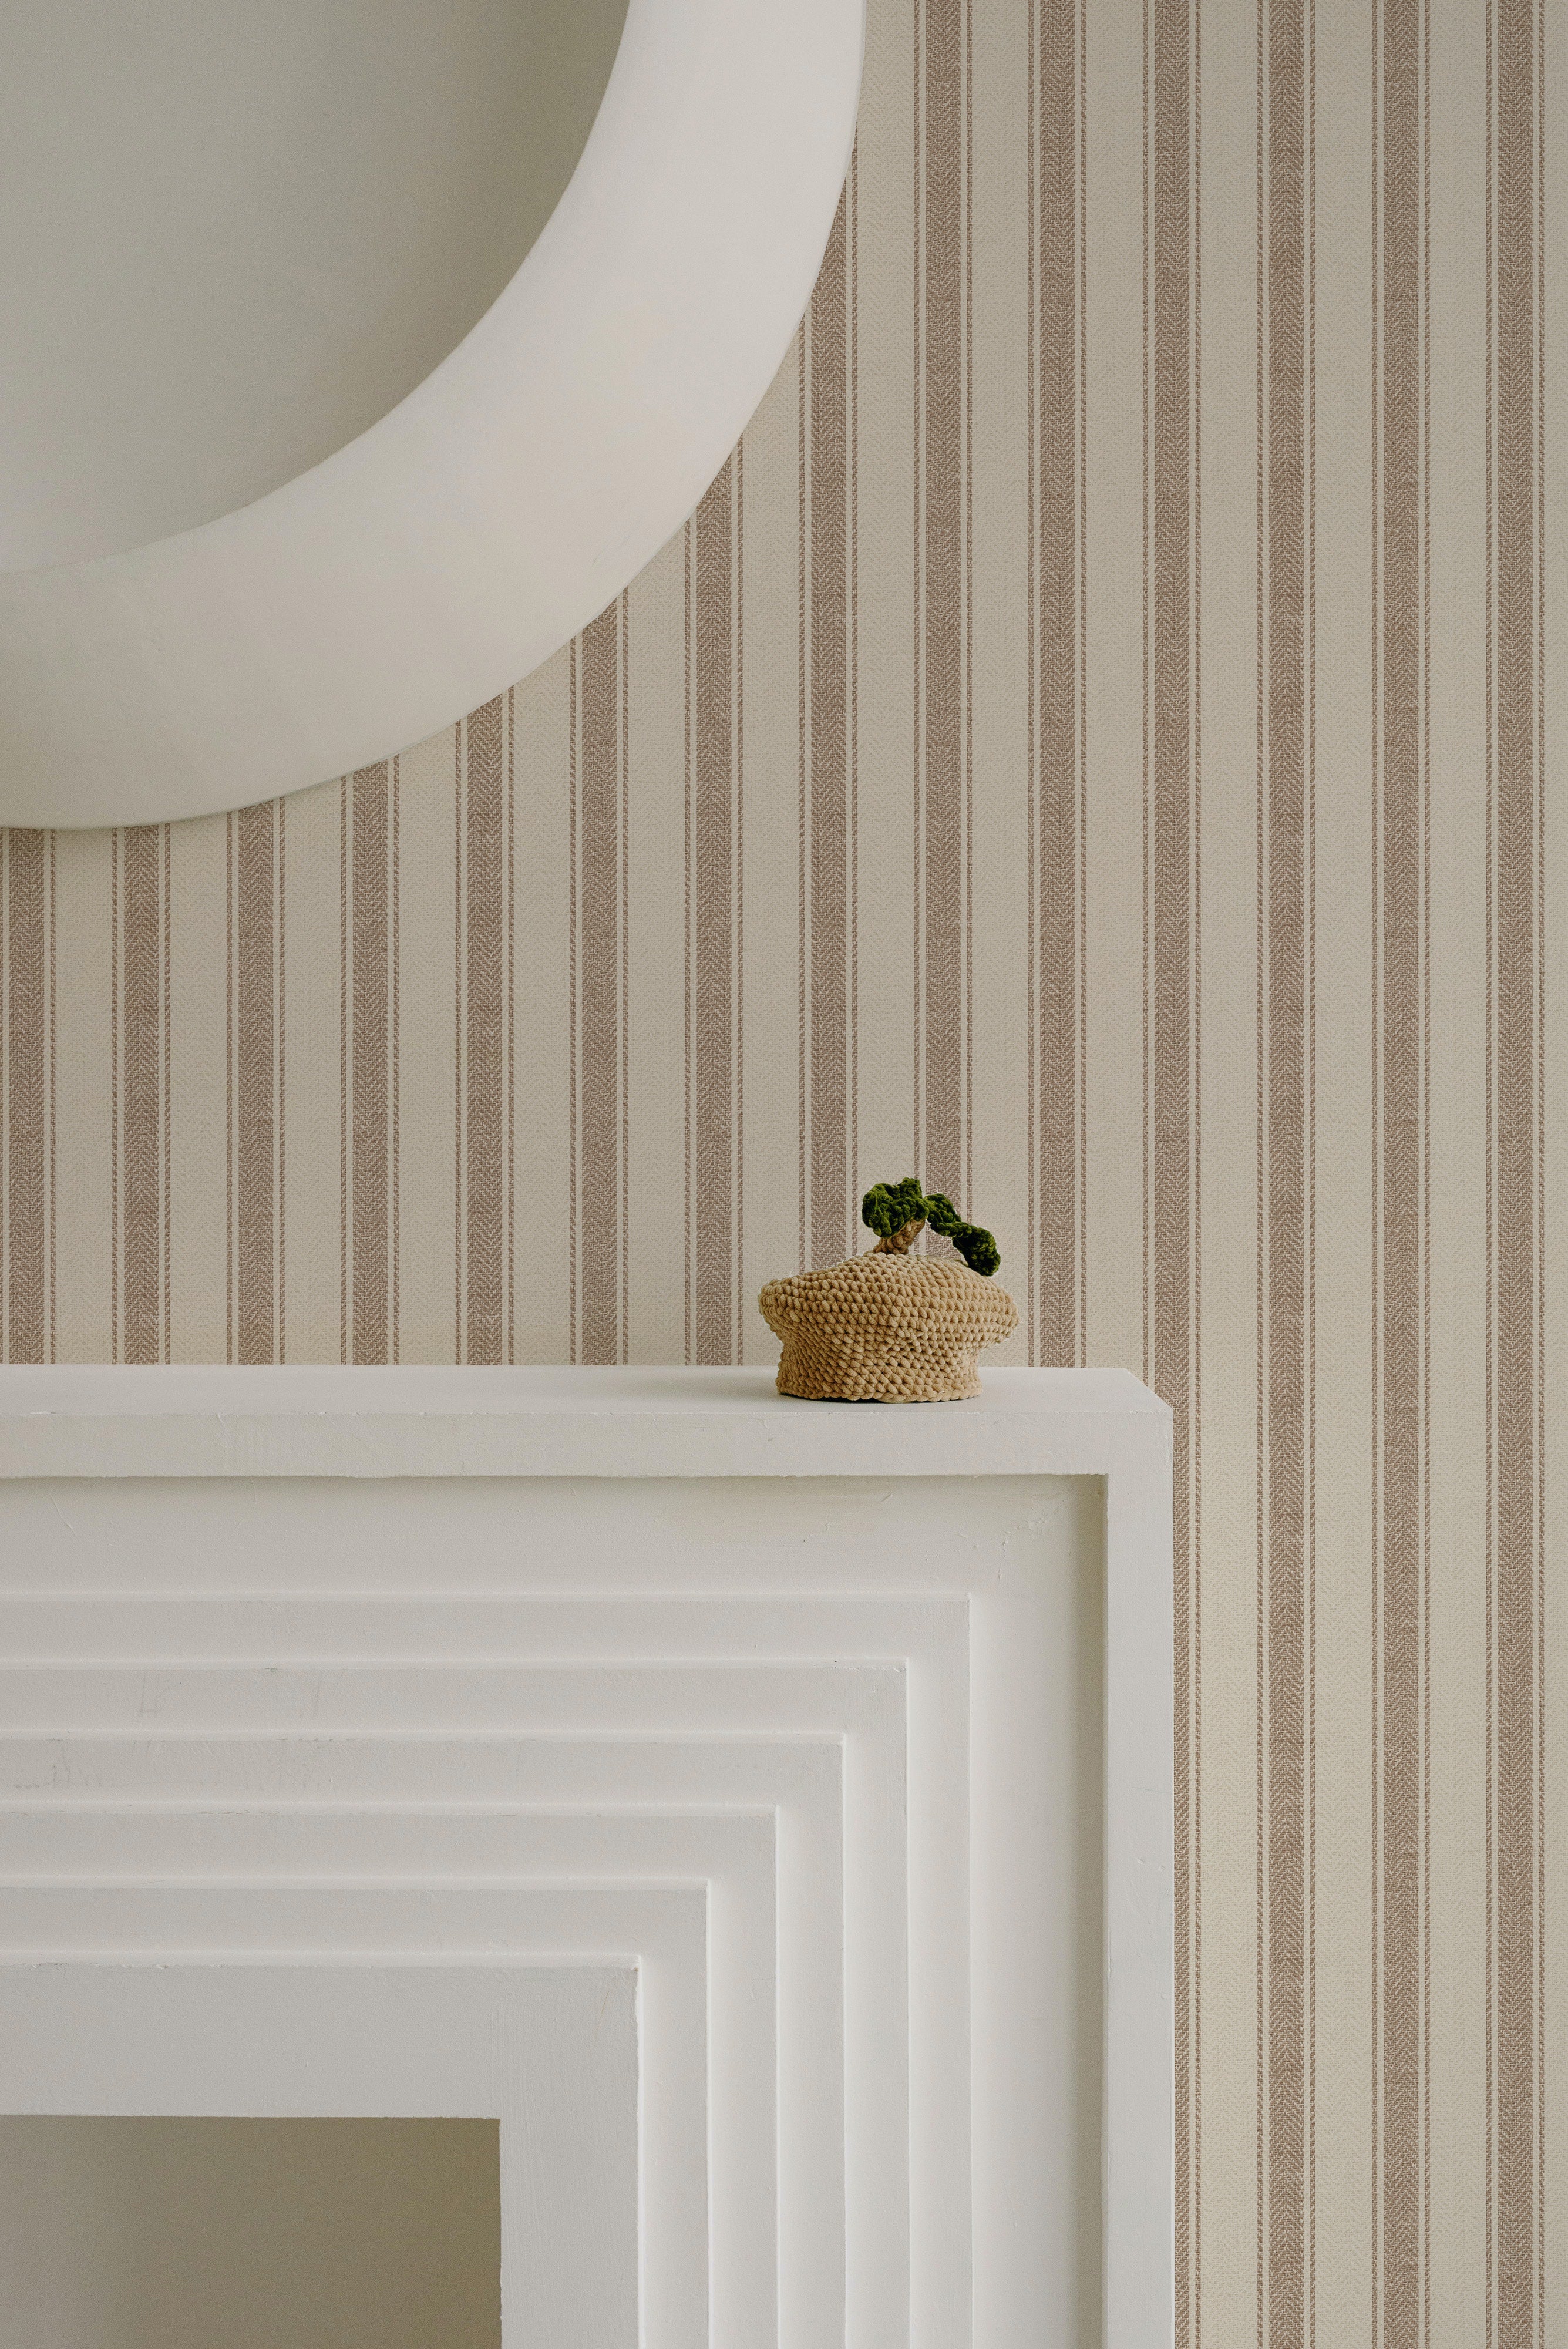 A minimalist detail shot showing the Striped Fabric Wallpaper above a white mantelpiece, where a small woven basket with a houseplant sits, highlighting the wallpaper's subtle texture and elegant stripe pattern.